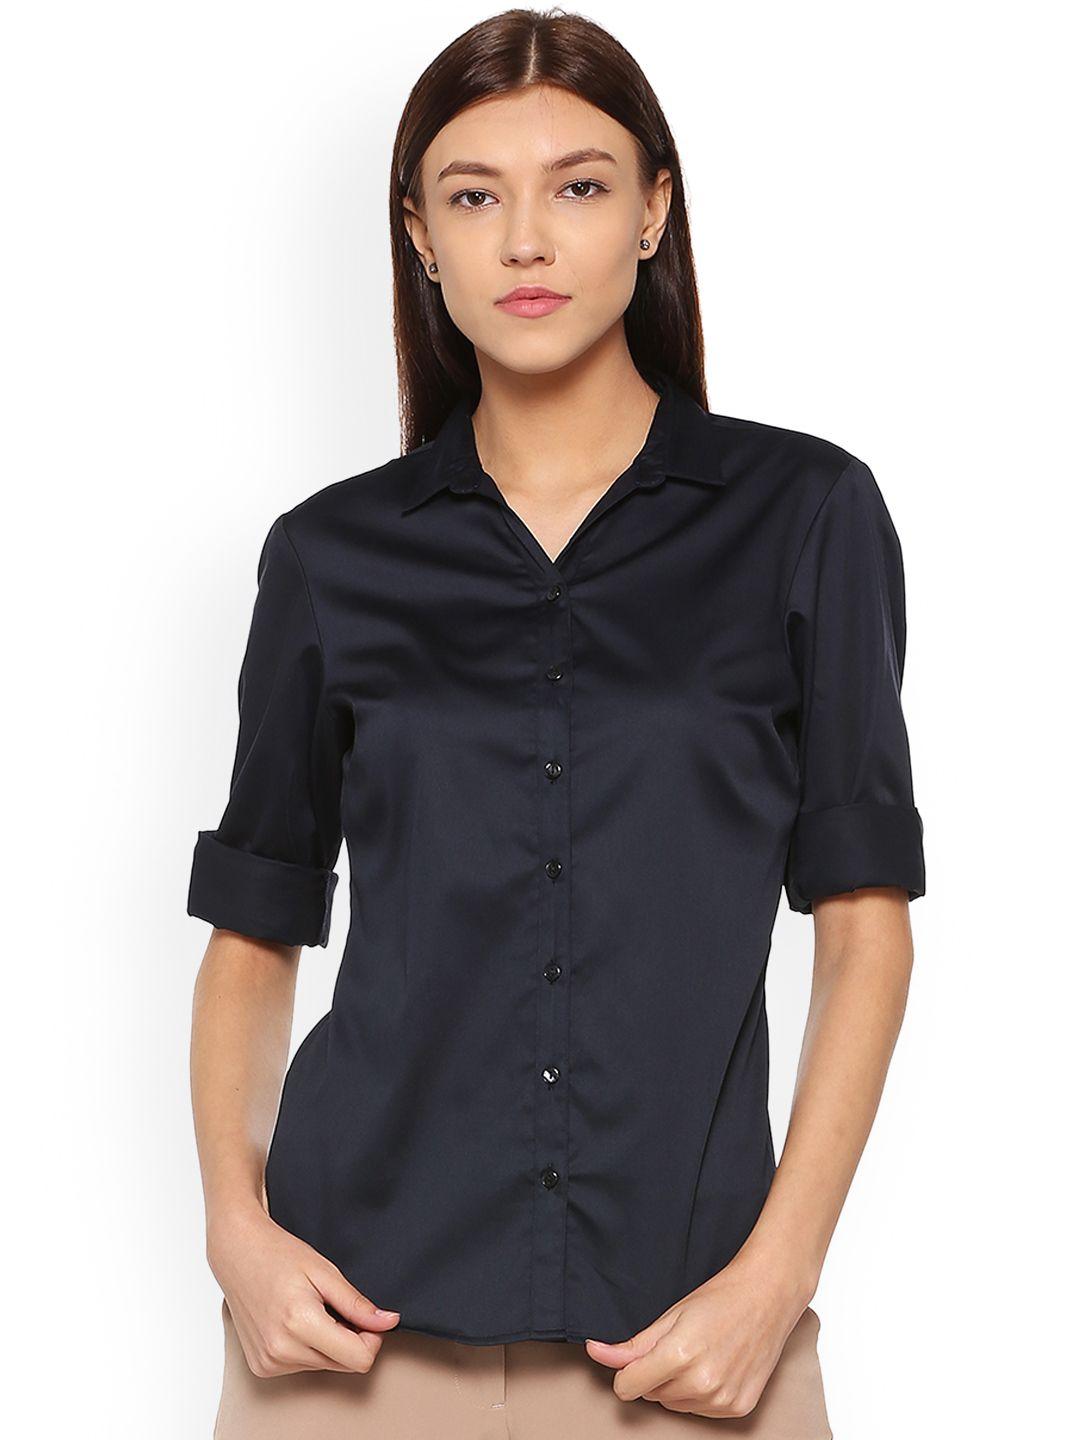 allen-solly-woman-black-solid-casual-shirt